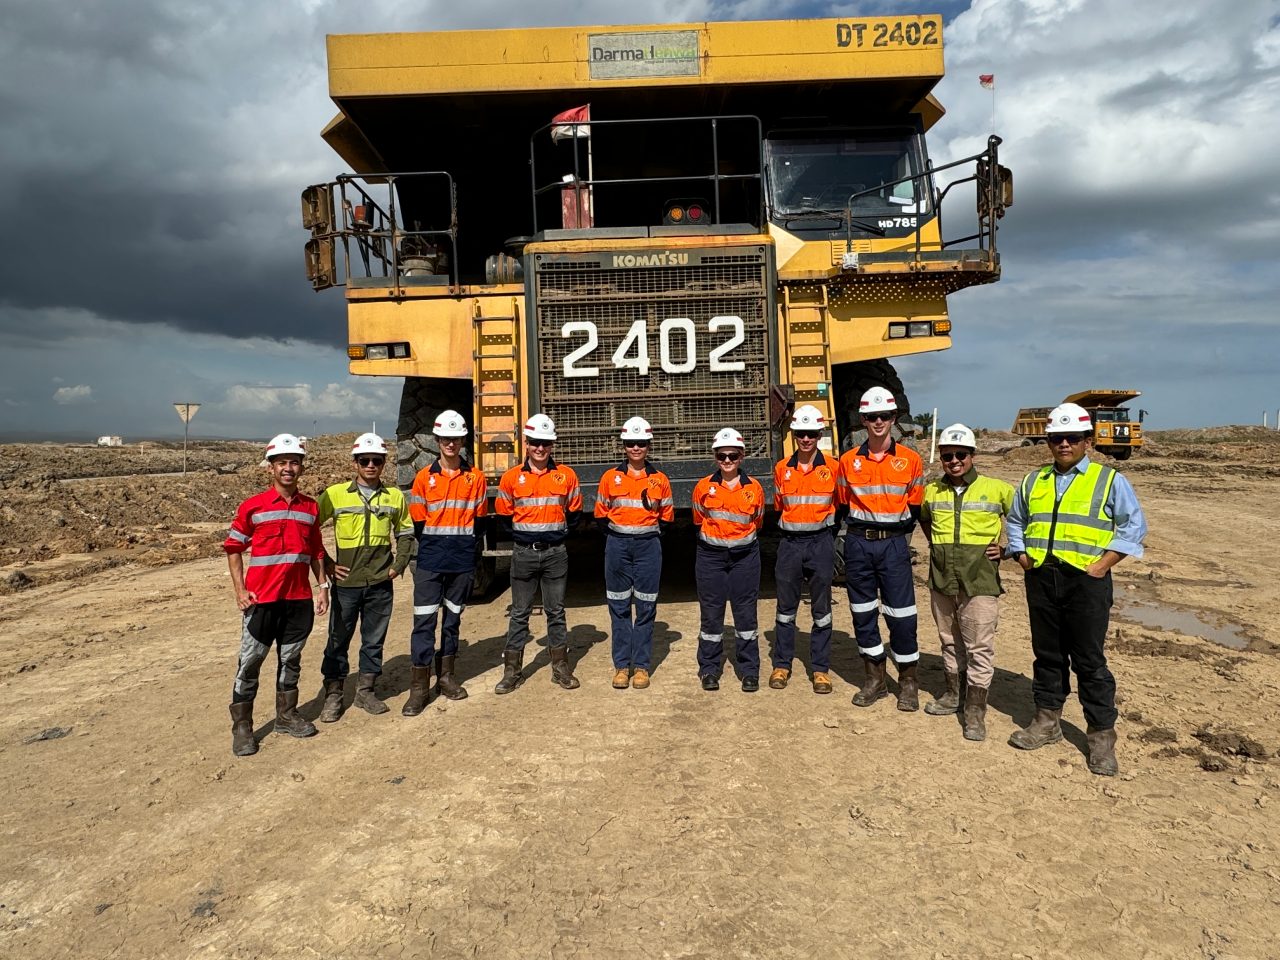 A group of people in hihg-vis clothing standing in front of a massive mining truck.